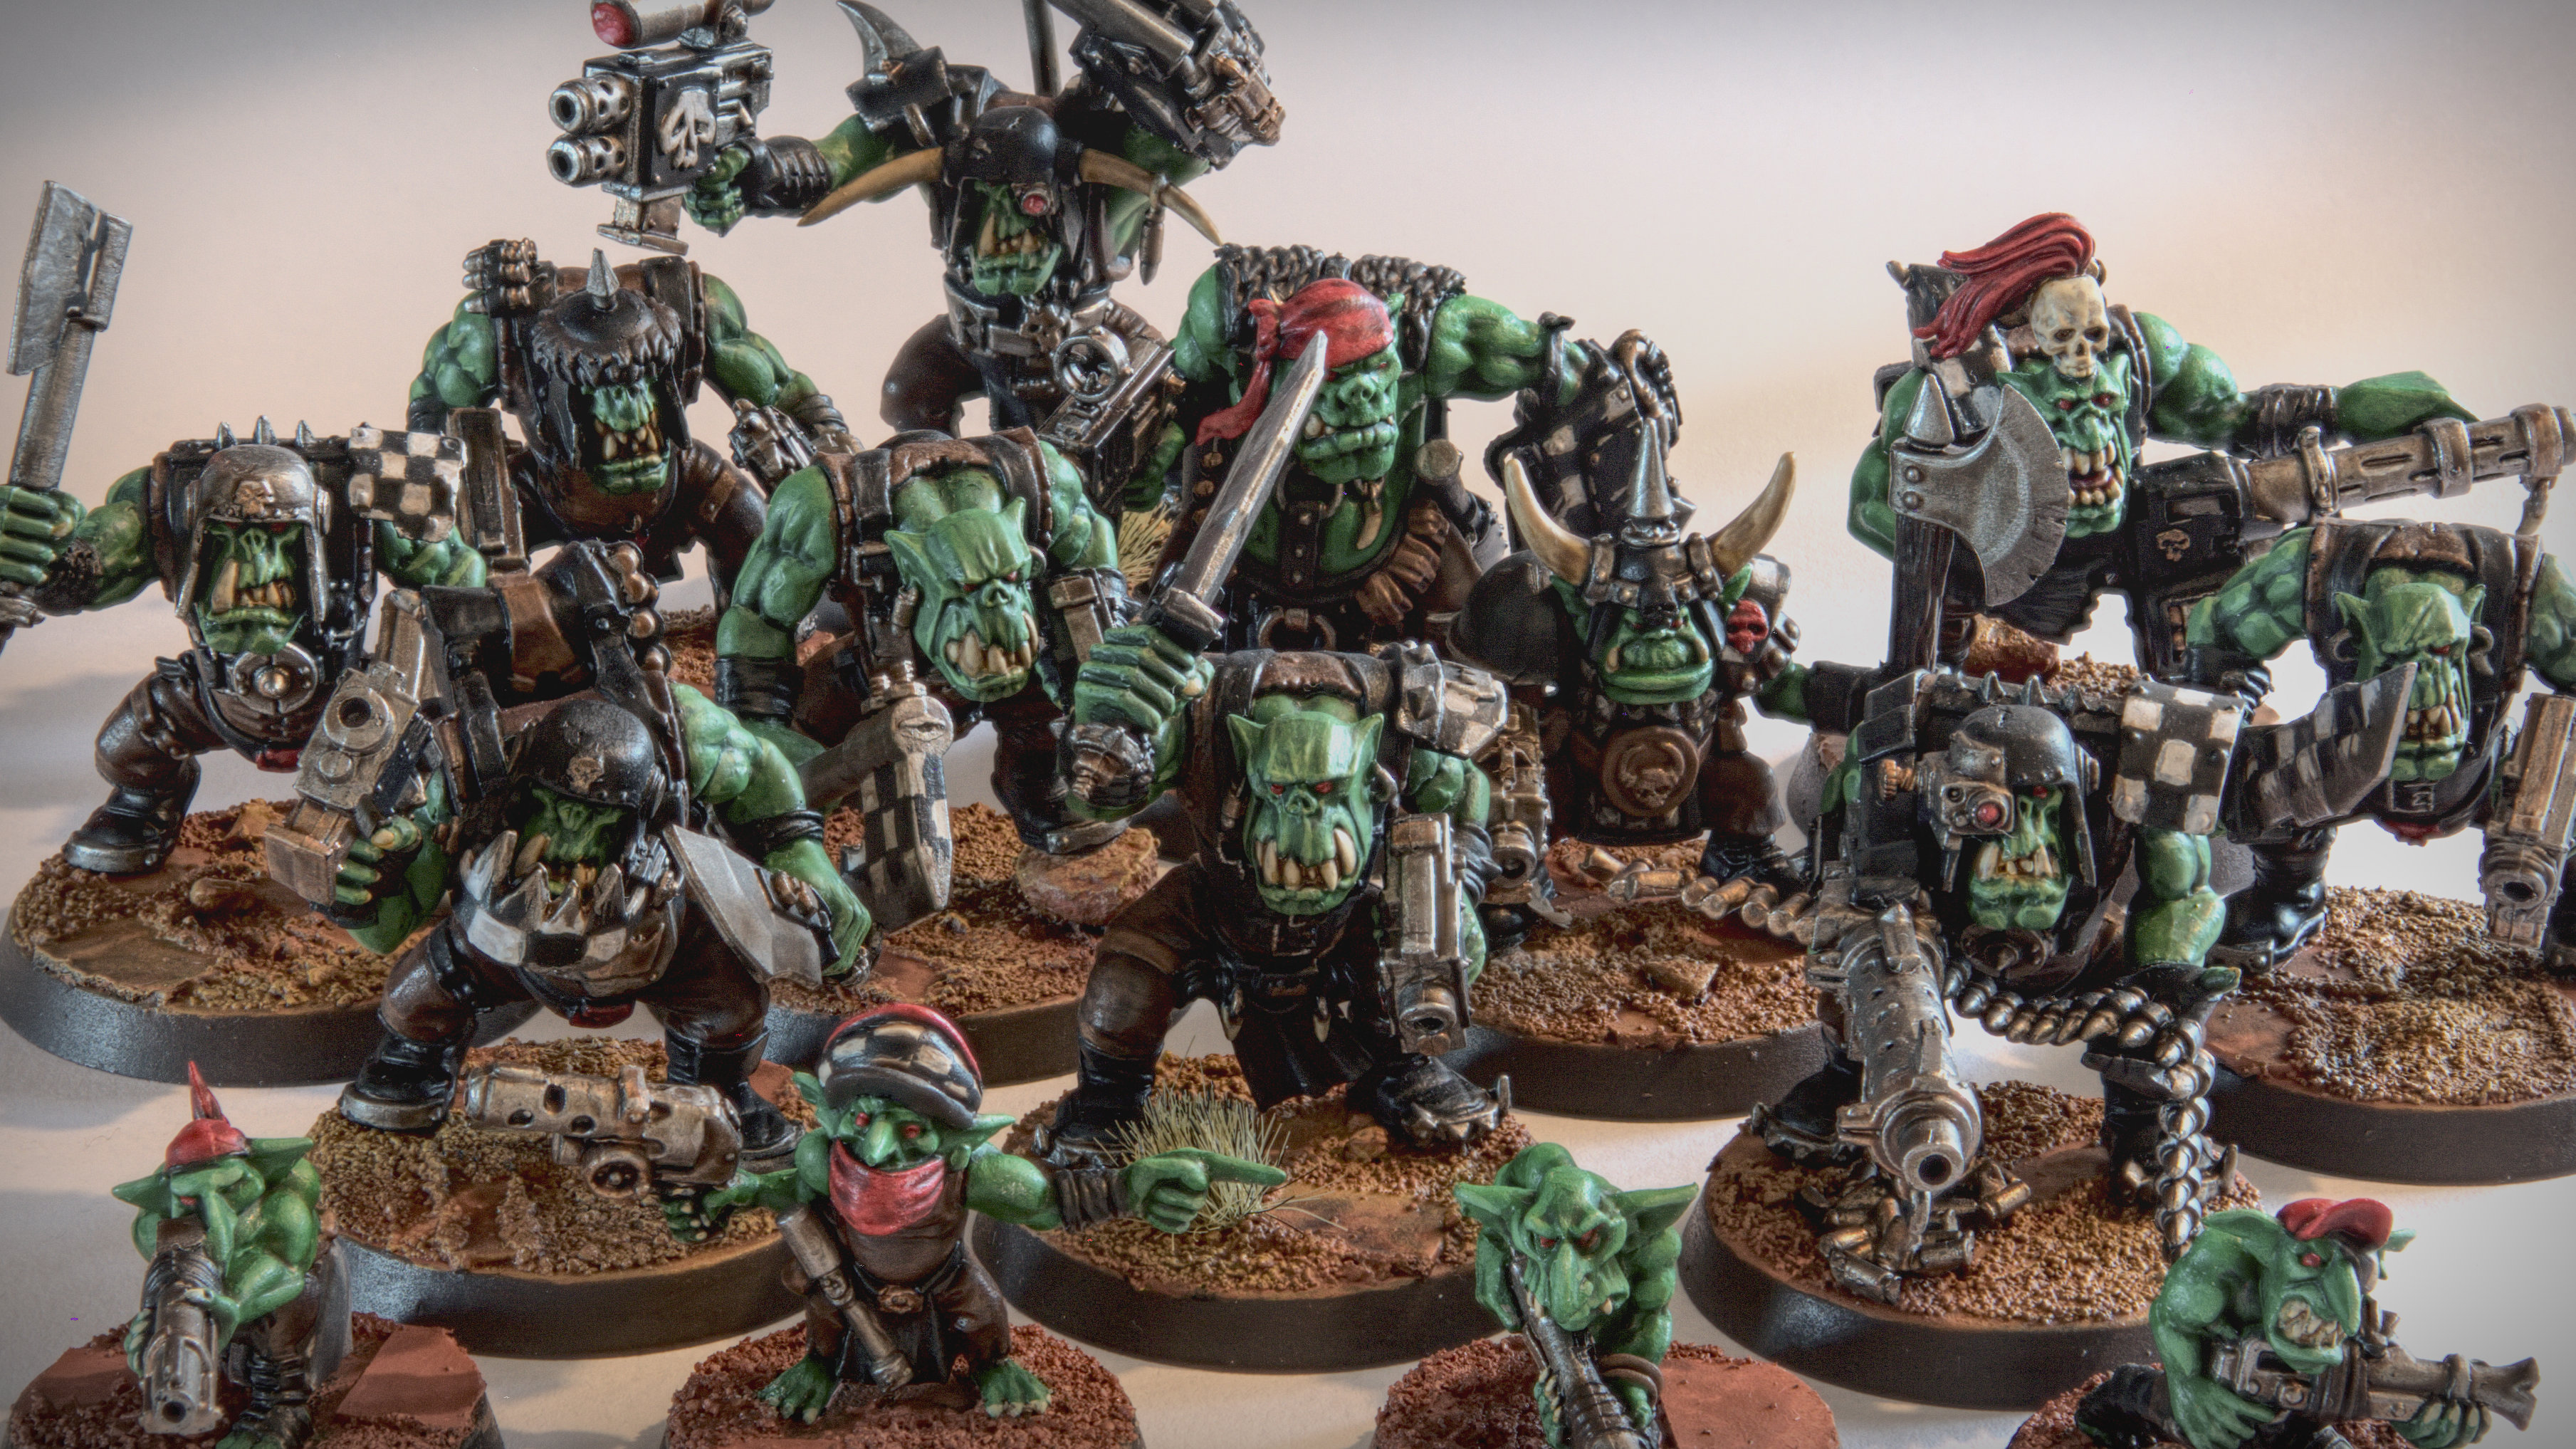 Four Games Workshop Ork miniatures ready ready to go